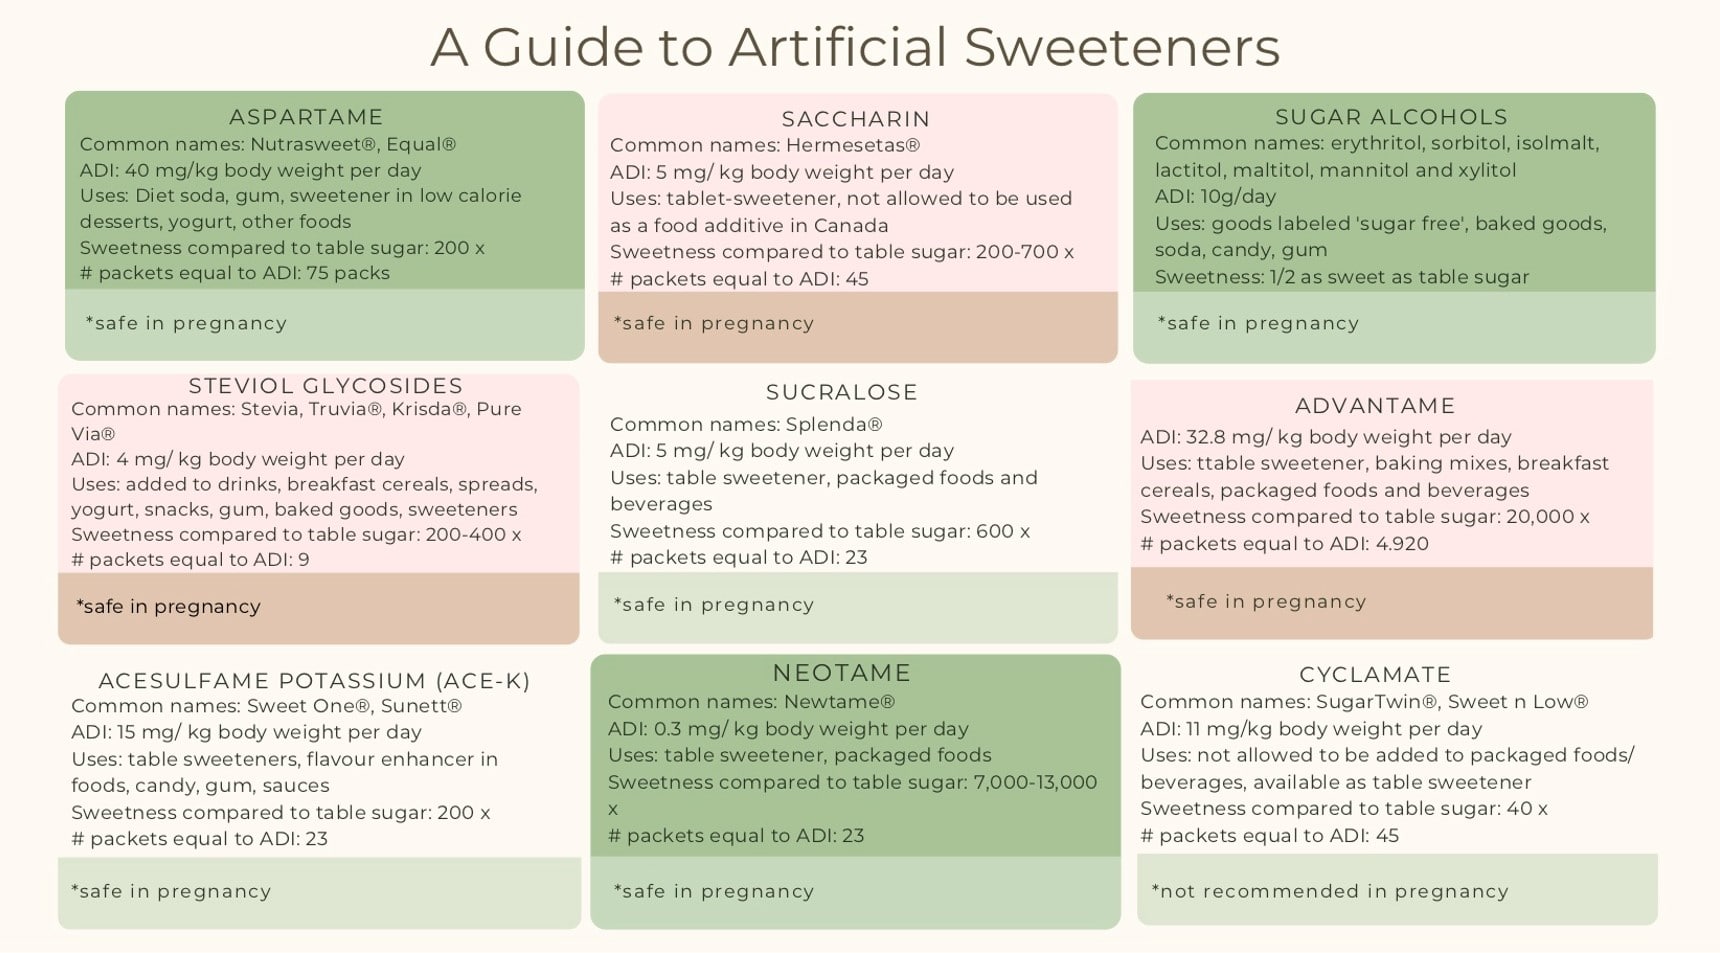 A Guide to Artificial Sweeteners